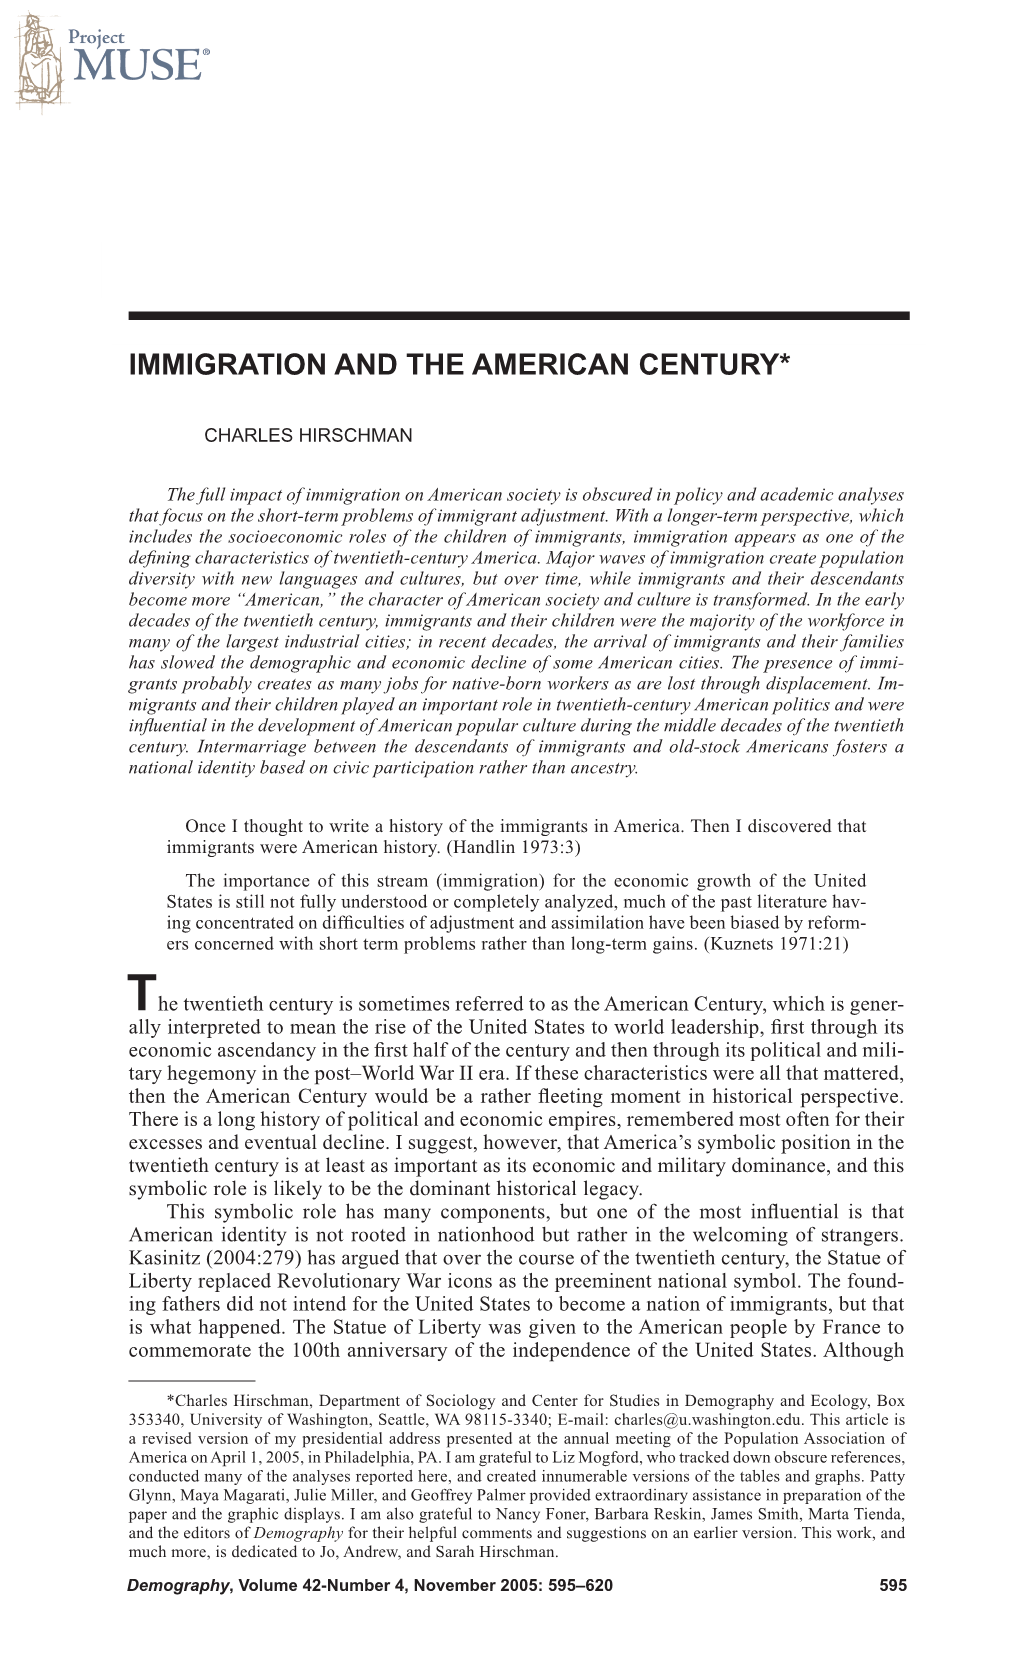 Immigration and the American Century